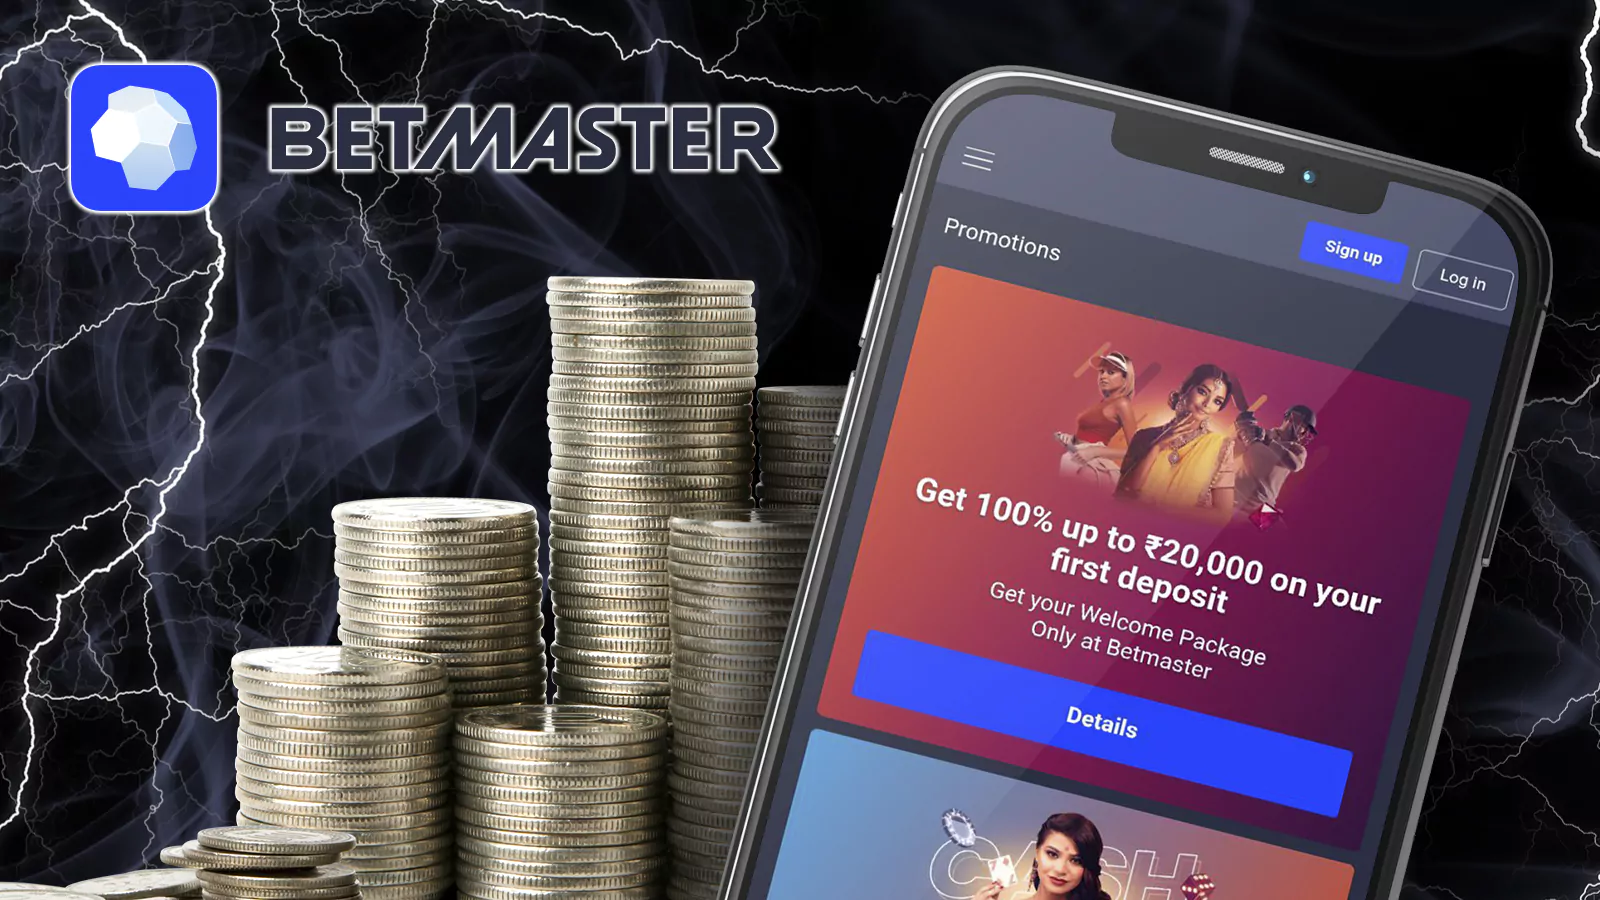 Get +100% up to INR 17,000 for betting on cricket or any other sport with Betmaster App.